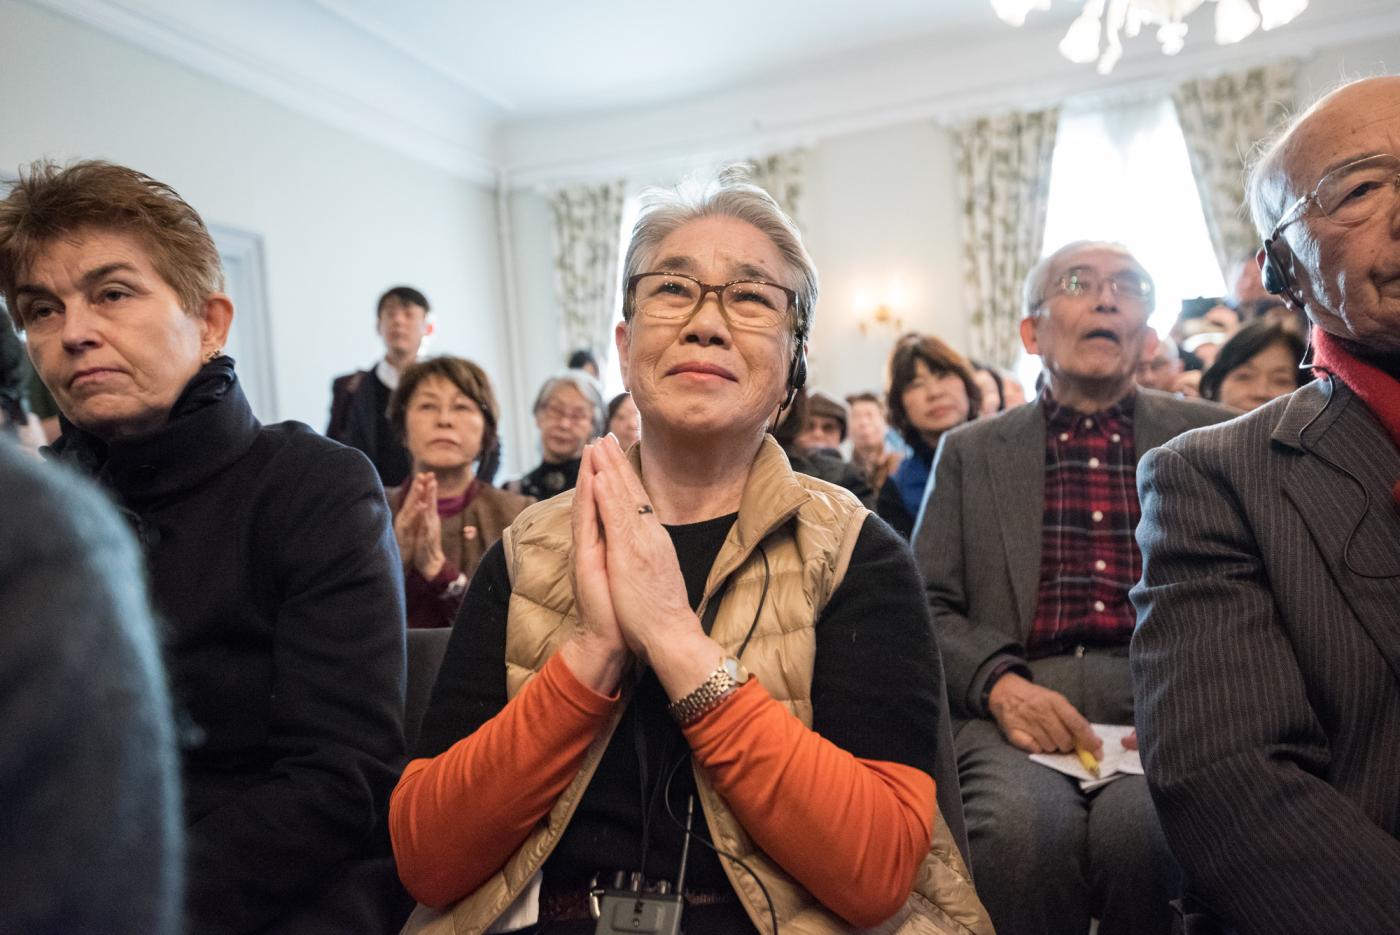 Photo by Albin Hillert/WCC: survivors from the 1945 atomic bombings, at an event in Oslo during the Nobel Prize weekend.